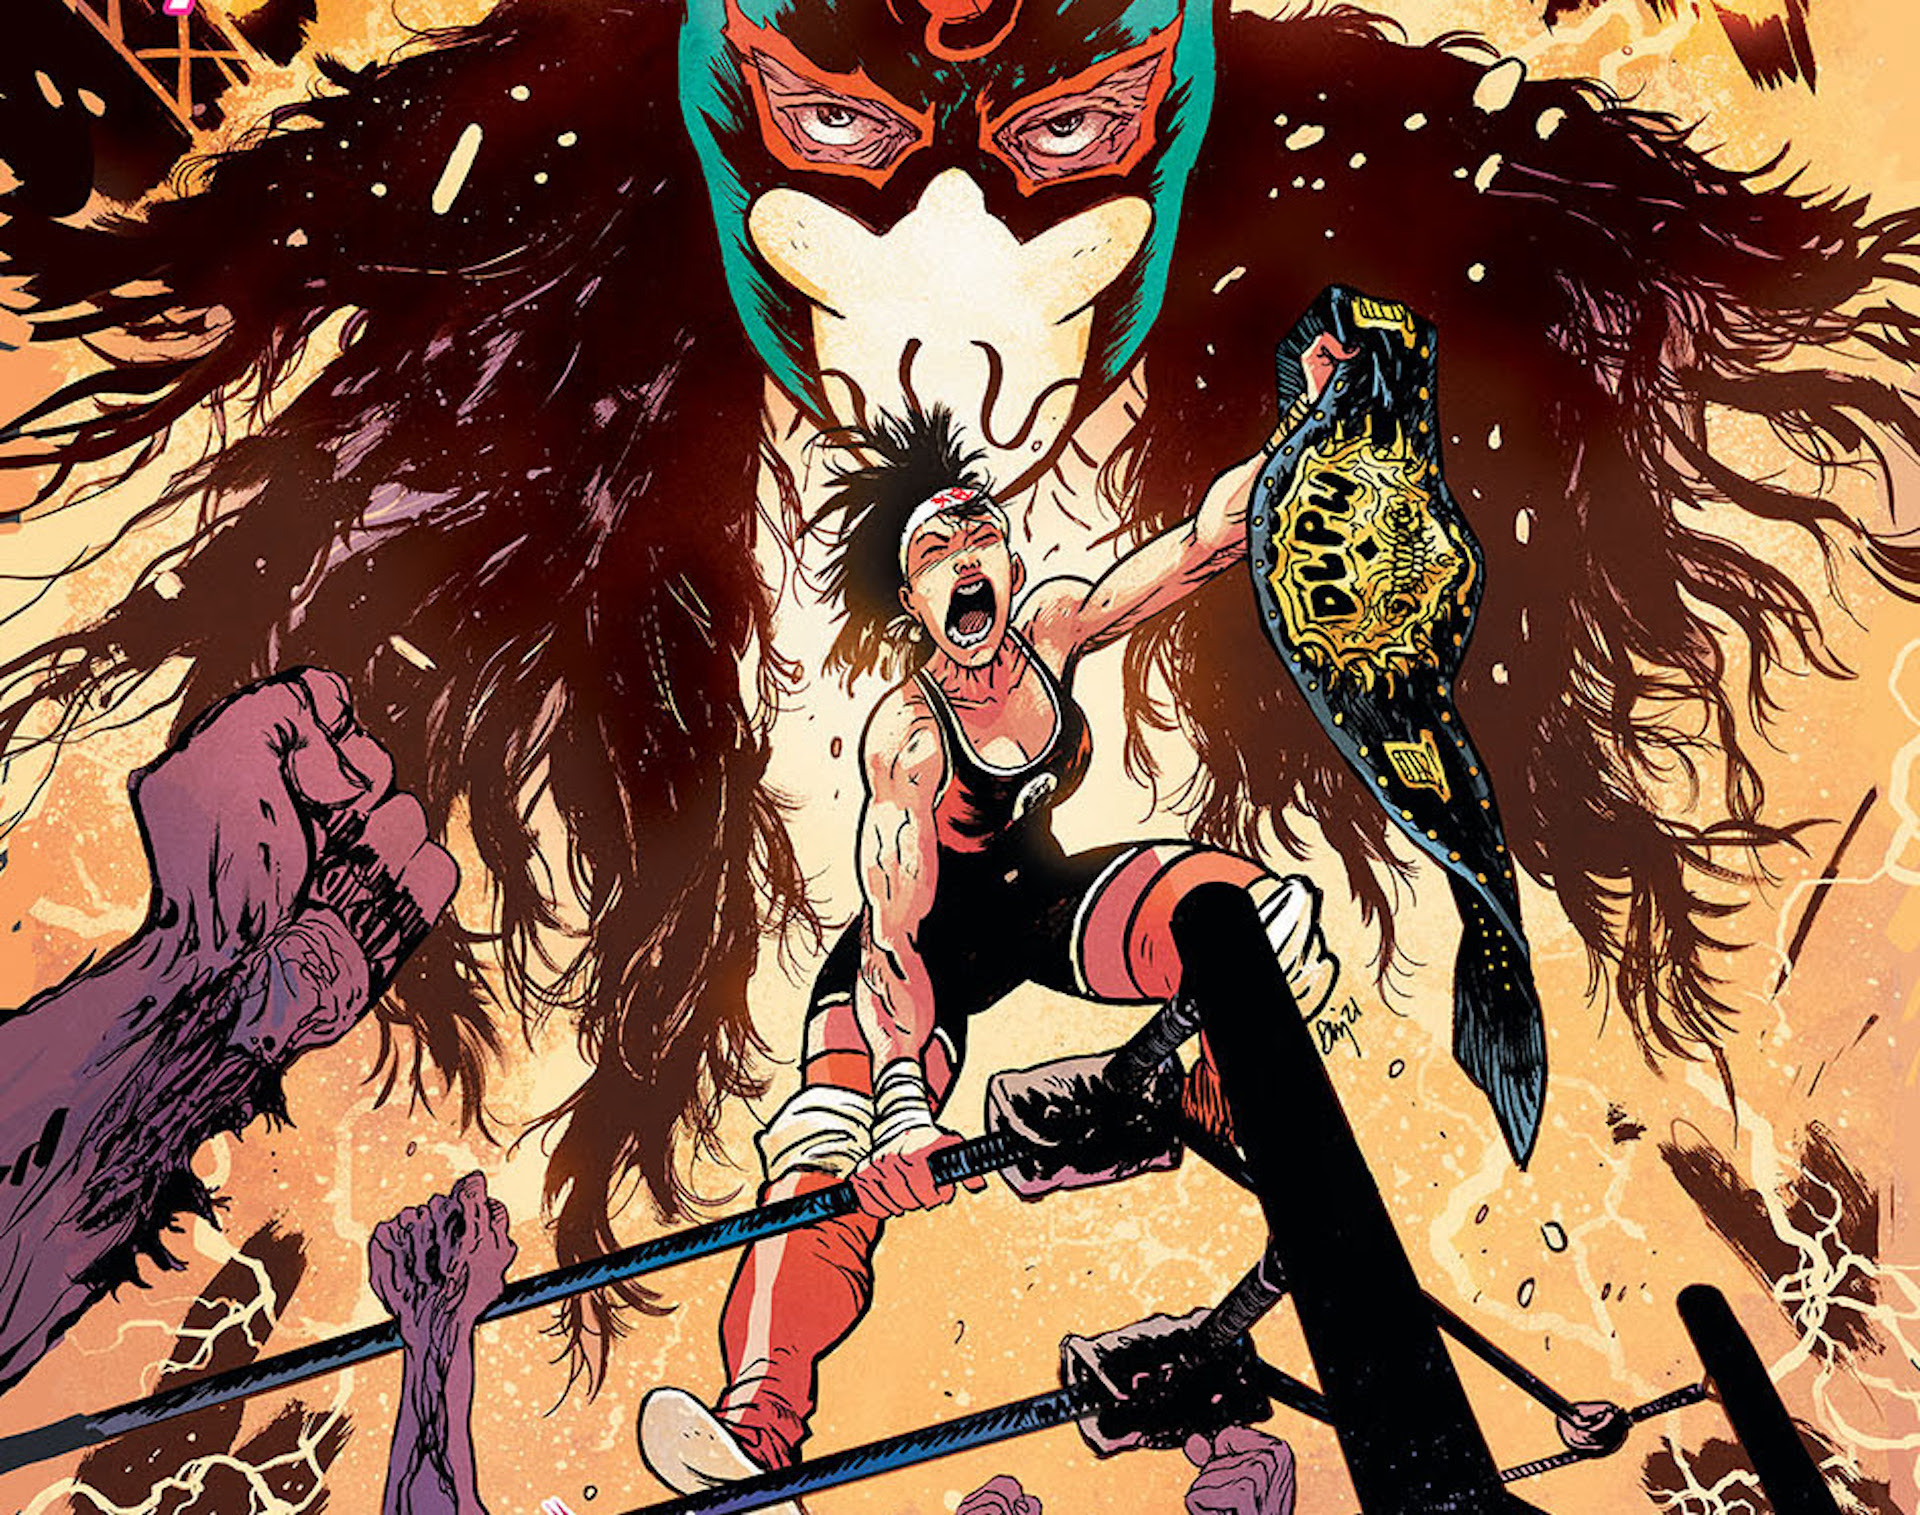 'Do A Powerbomb' #1 has tons of heart that pro wrestling and casual fans will love